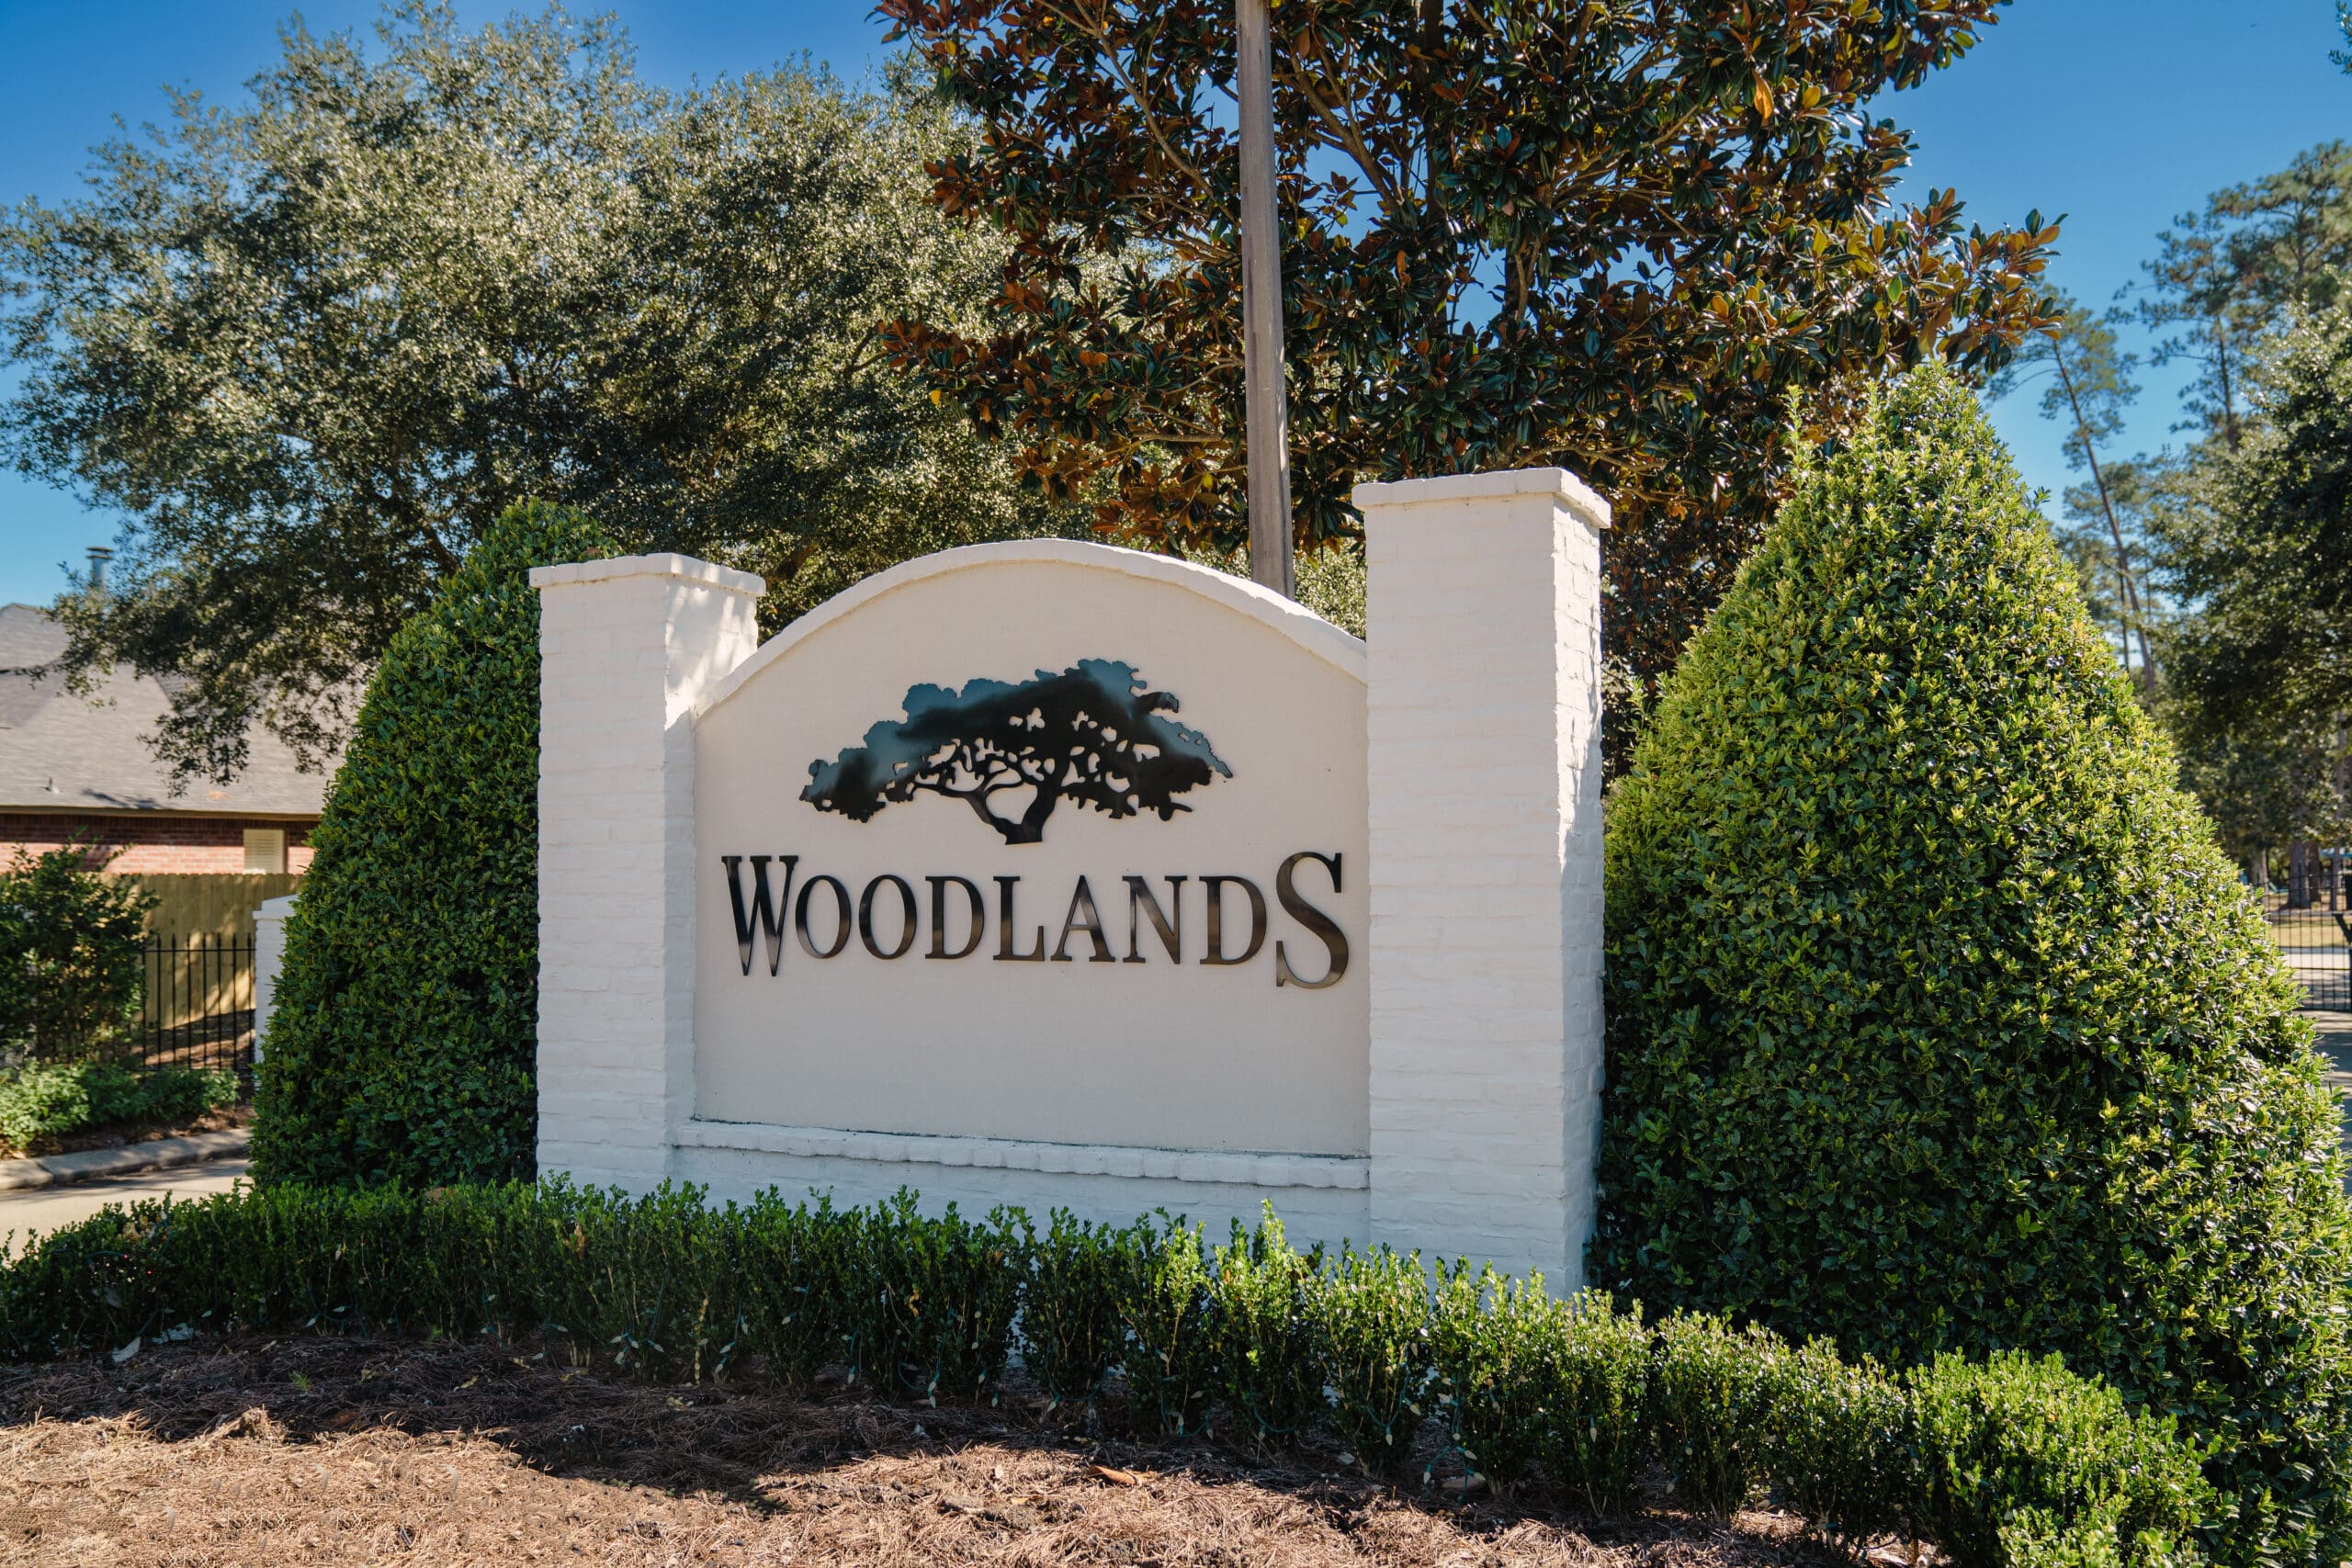 The Woodlands Subdivision